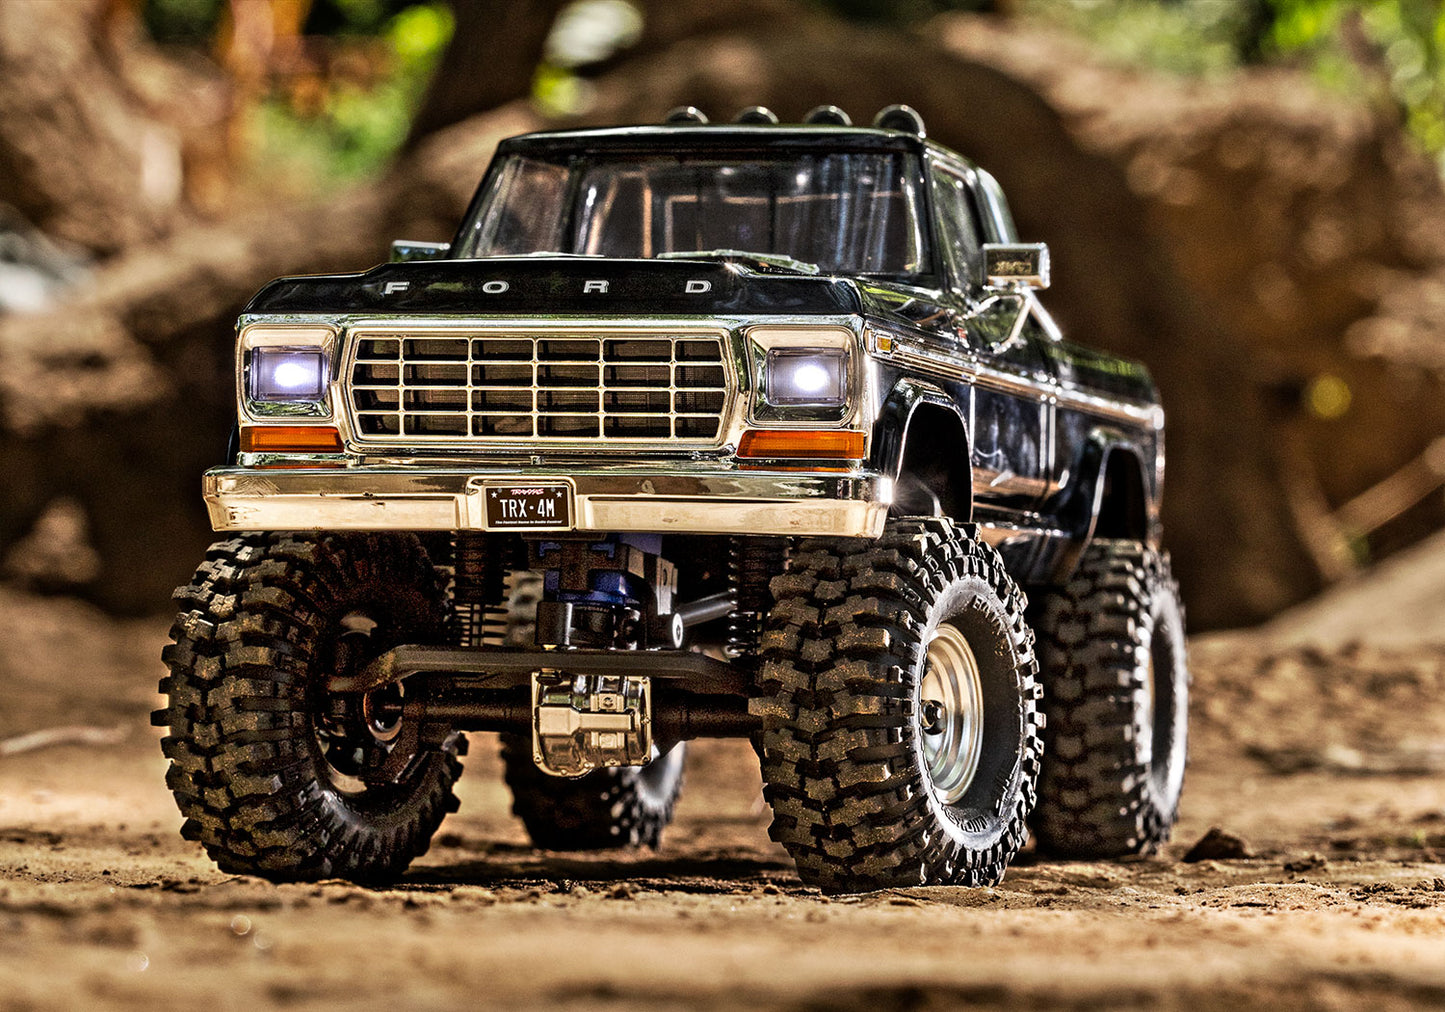 Traxxas 97044-1 Black TRX-4M Ford F-150 High Trail Edition AVAILABLE IN STORES ONLY